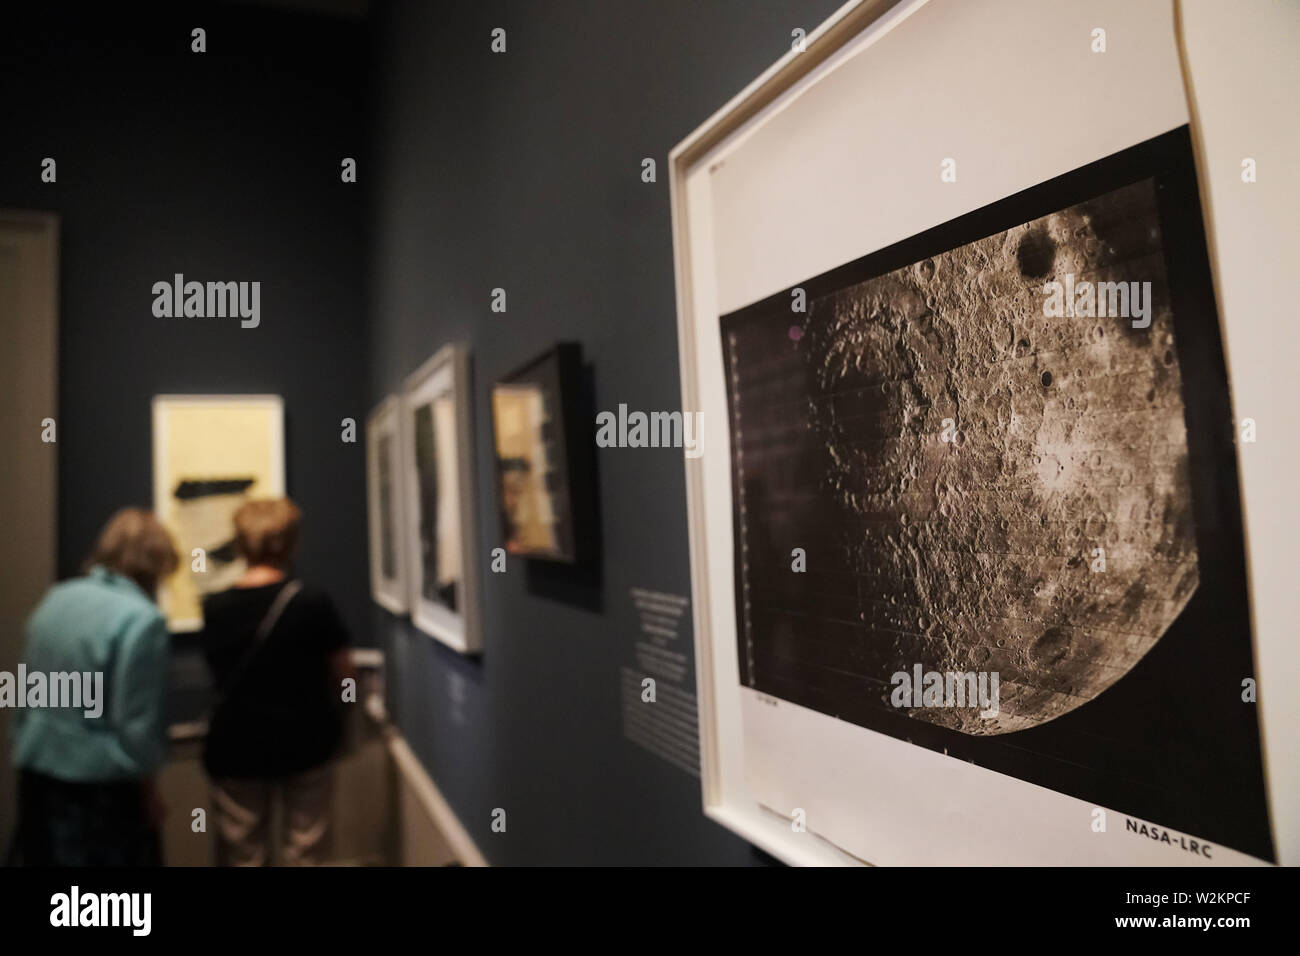 Washington, USA. 9th July, 2019. Visitors view exhibits during a preview of 'By the Light of the Silvery Moon: A Century of Lunar Photographs' at the National Gallery of Art in Washington, DC, the United States, on July 9, 2019. Some 50 works including a selection of photographs will be displayed in the exhibition lasting from July 14, 2019 through Jan. 5, 2020 to mark the 50th anniversary of the Apollo 11 moon landing. Credit: Liu Jie/Xinhua/Alamy Live News Stock Photo